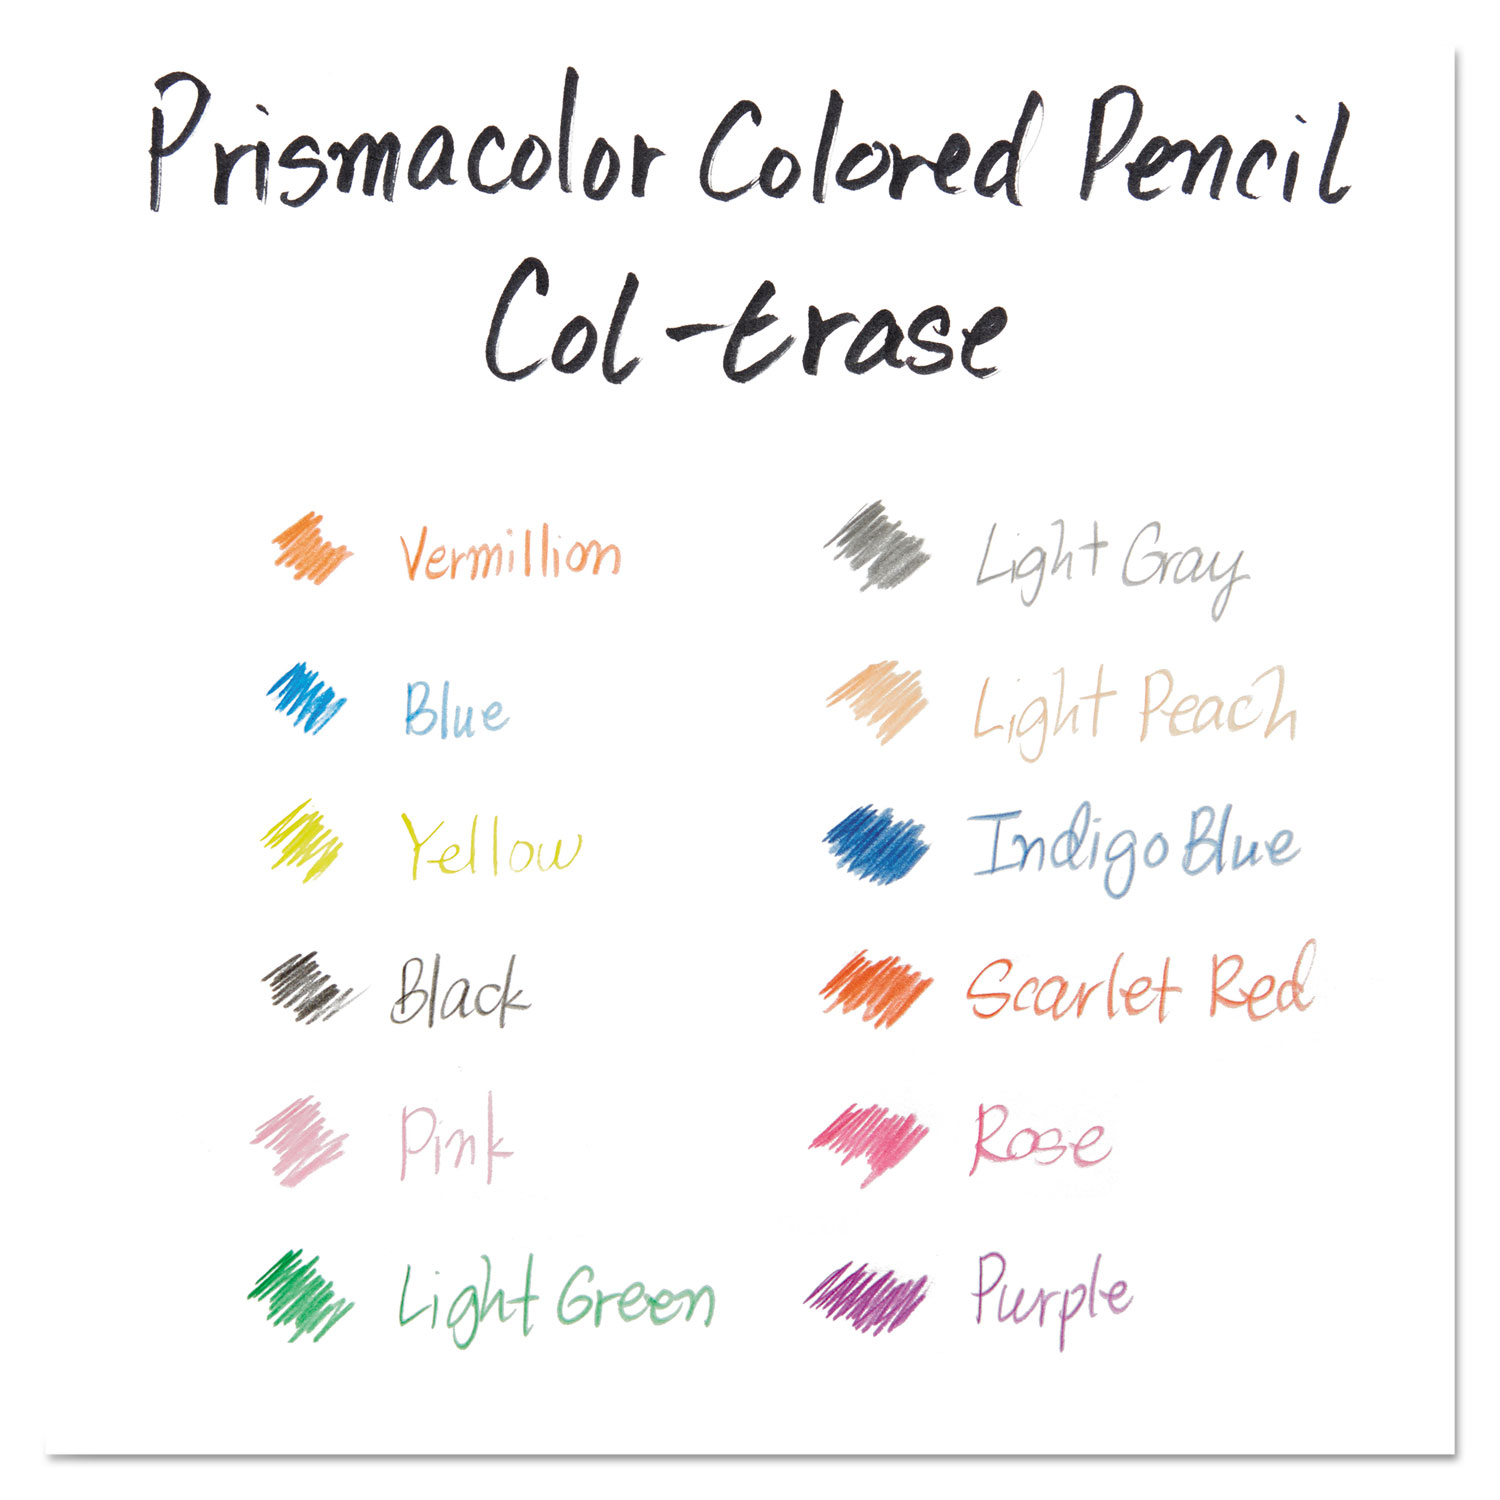 Prismacolor 20044 Col-Erase 12 Blue Woodcase Barrel 0.7mm Soft Lead Blue  Colored Pencil with